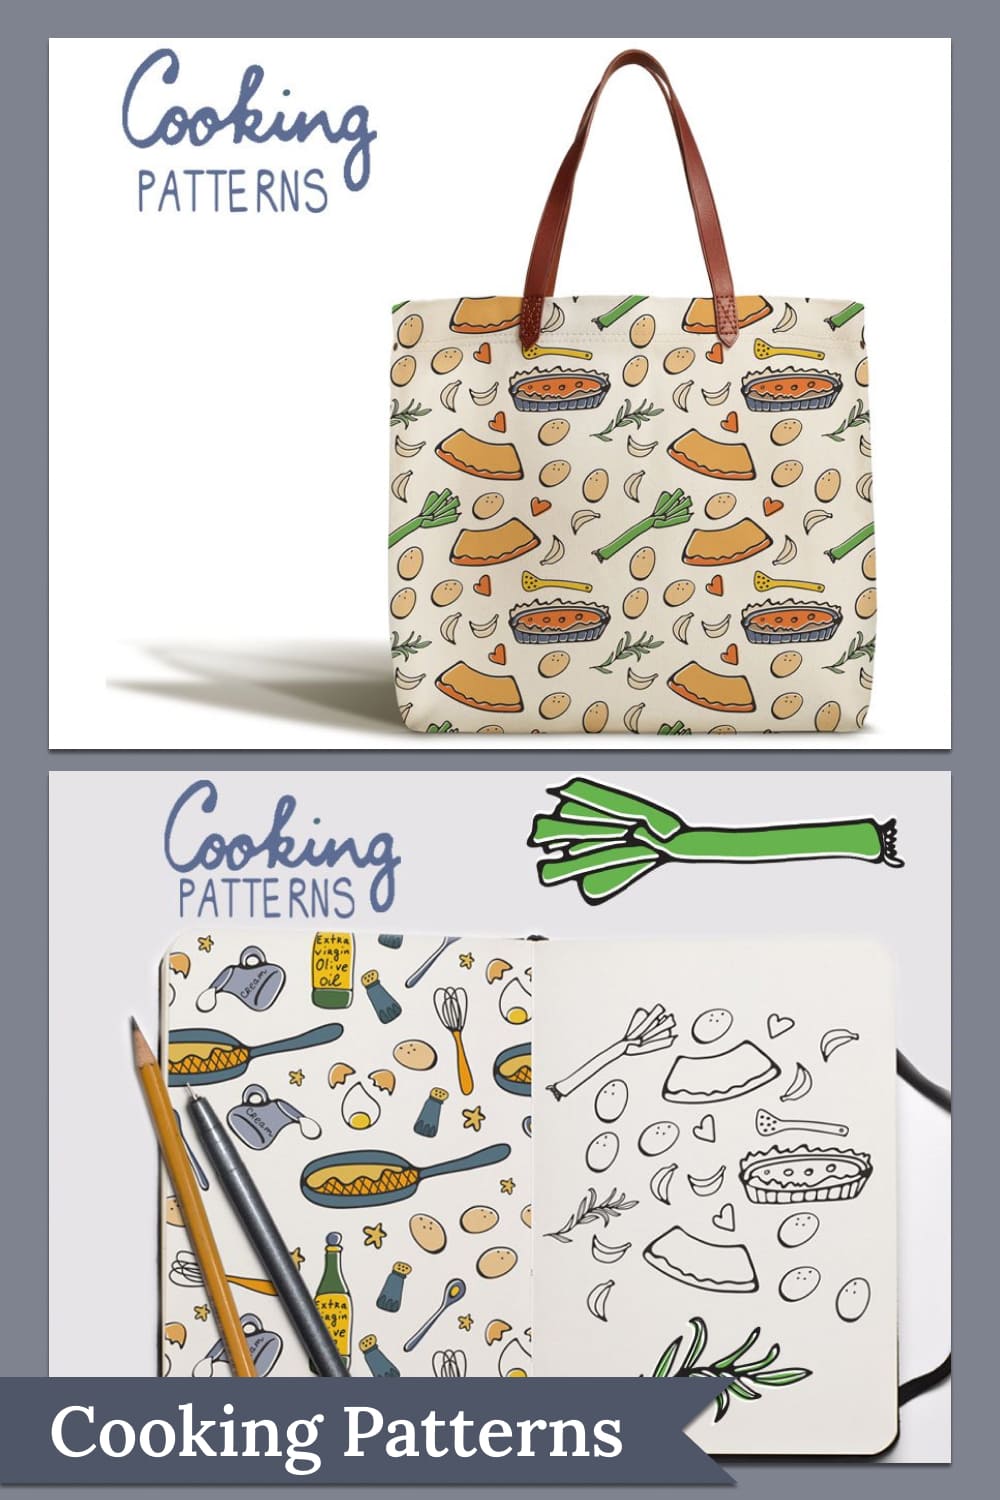 Cooking patterns - pinterest image preview.